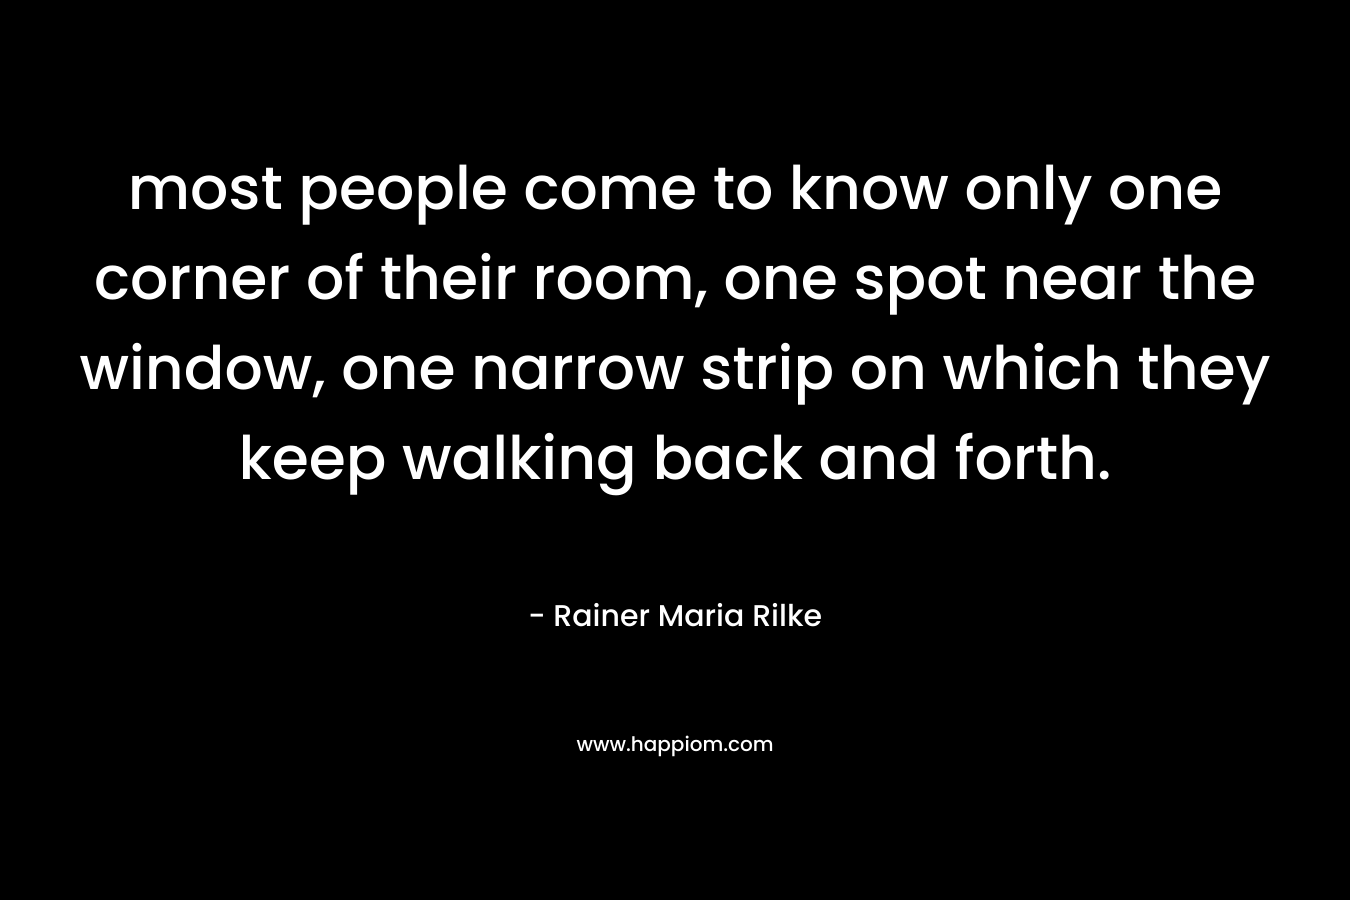 most people come to know only one corner of their room, one spot near the window, one narrow strip on which they keep walking back and forth. – Rainer Maria Rilke